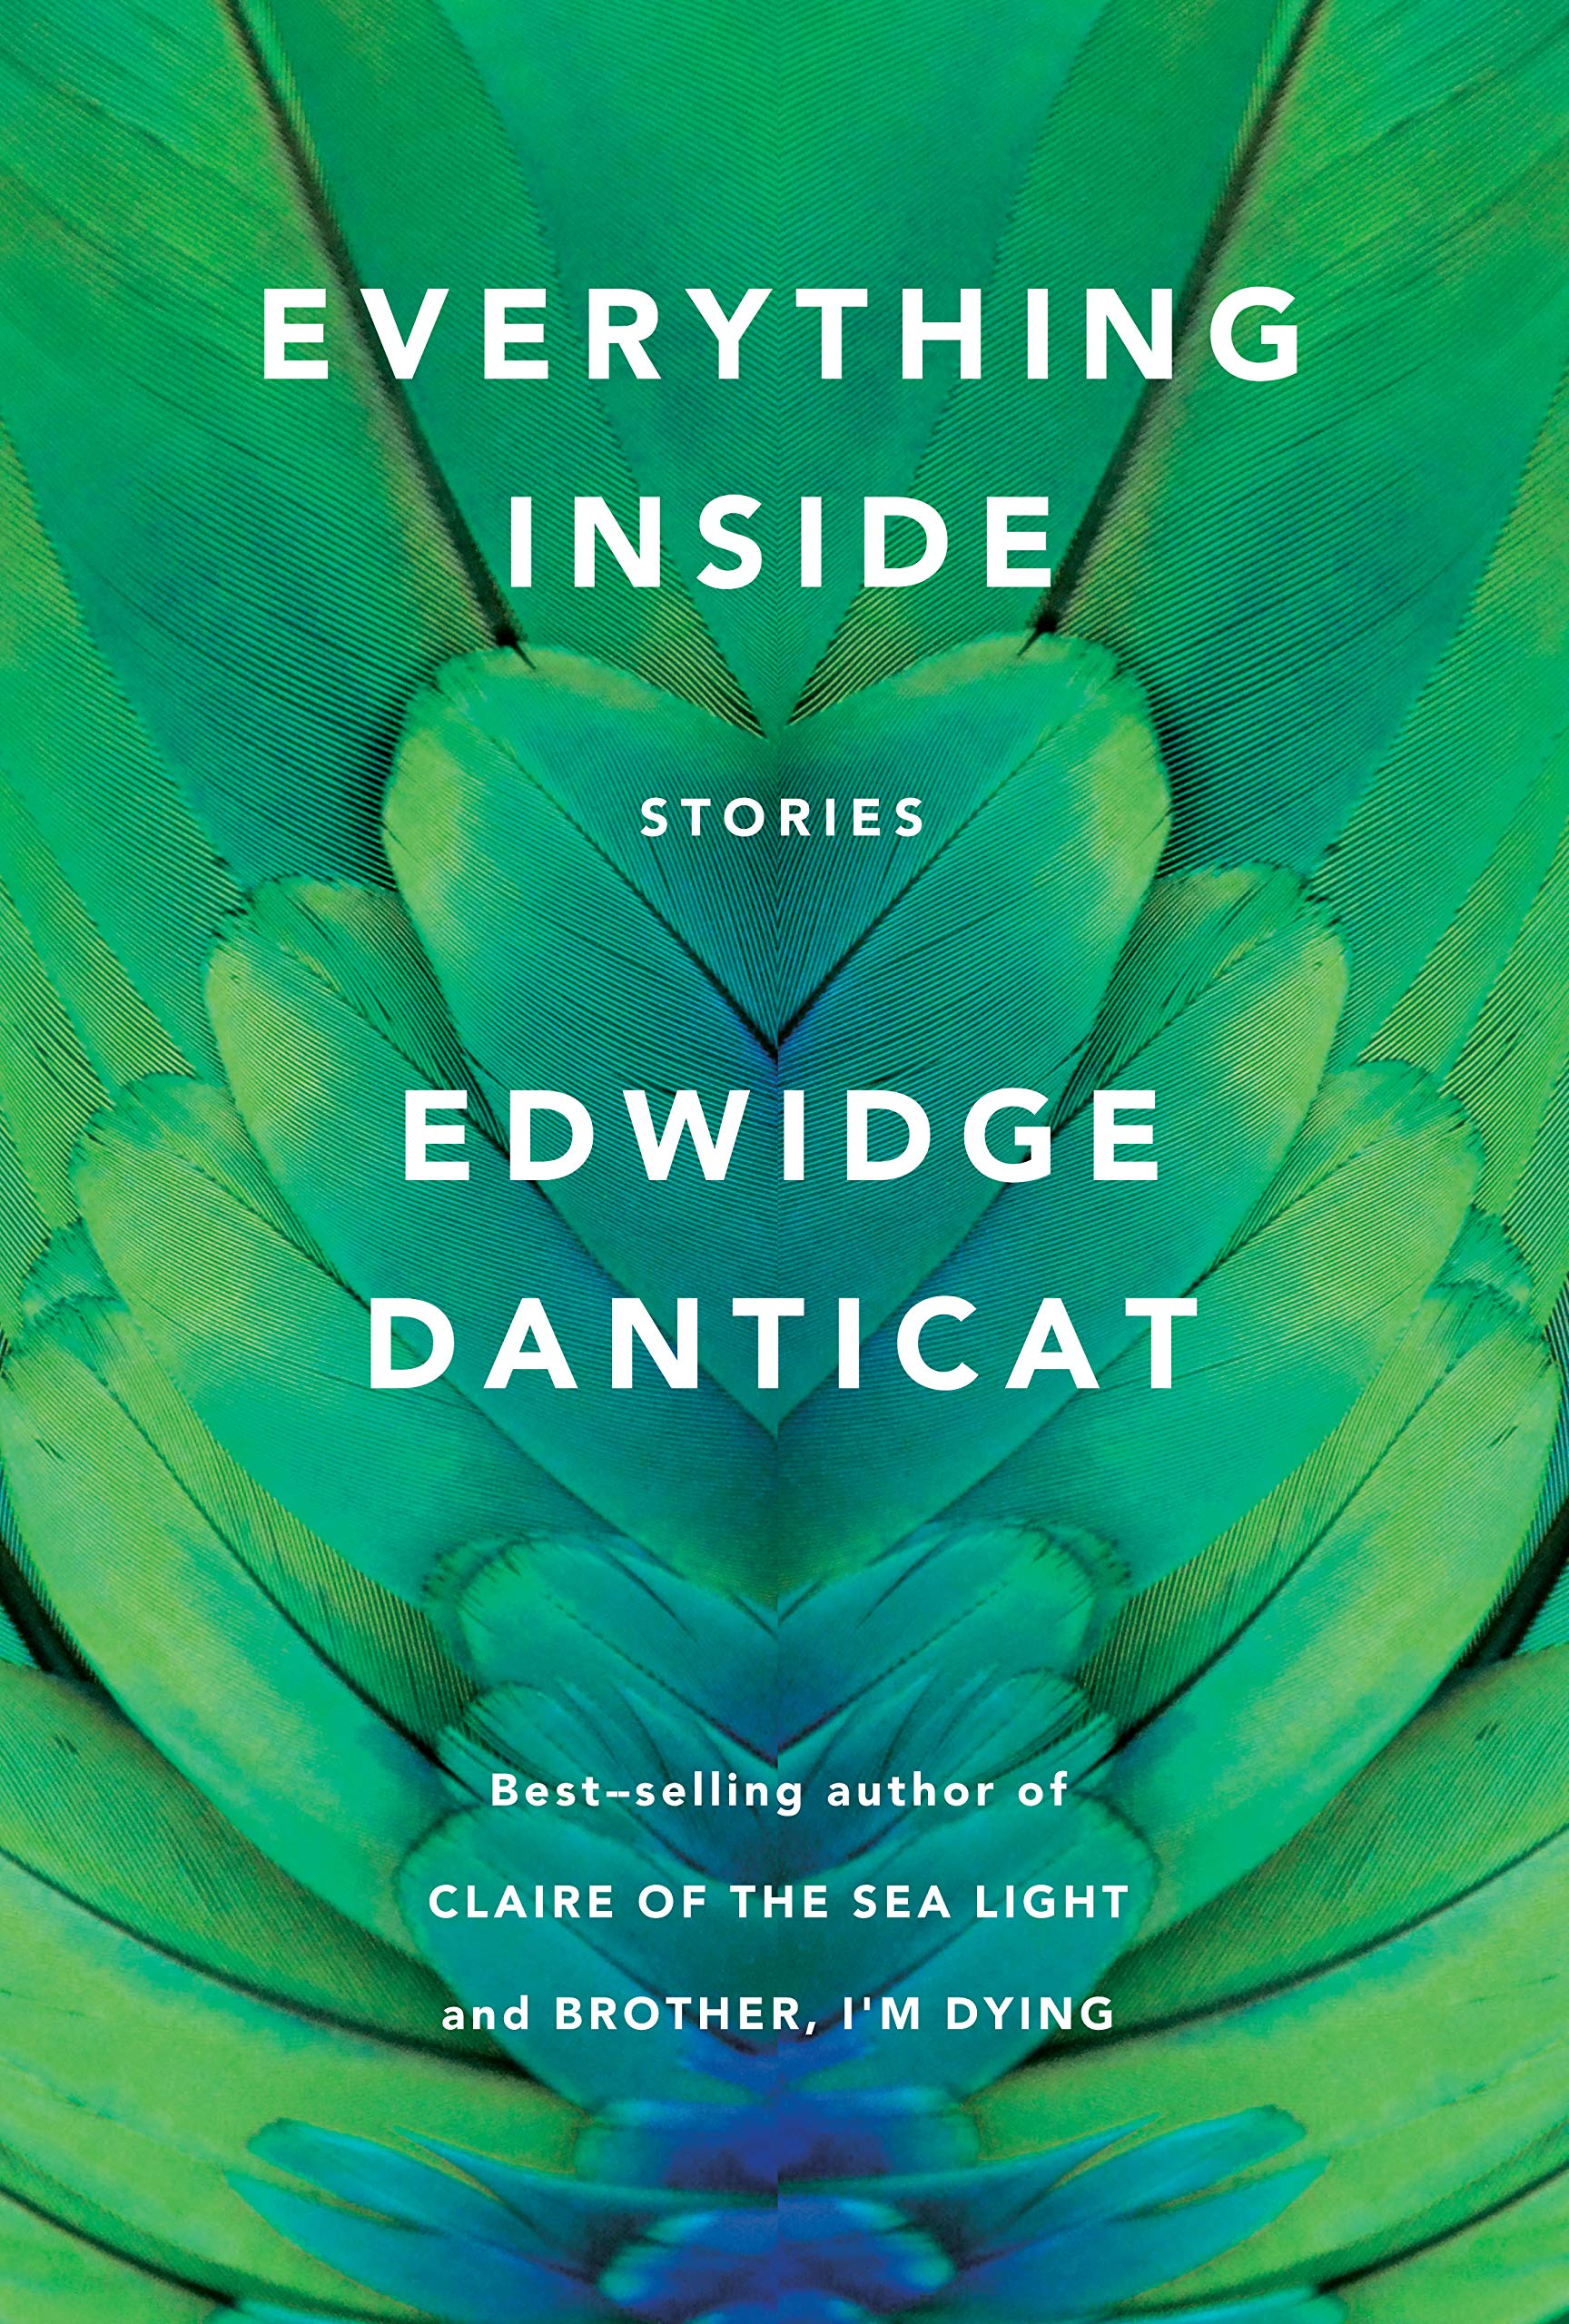 Vivid green peacock feathers provide a mesmerizing backdrop for the title of a book called "everything inside," a collection of stories by edwidge danticat, acclaimed author of "breath, eyes, memory" and "brother, i'm dying.